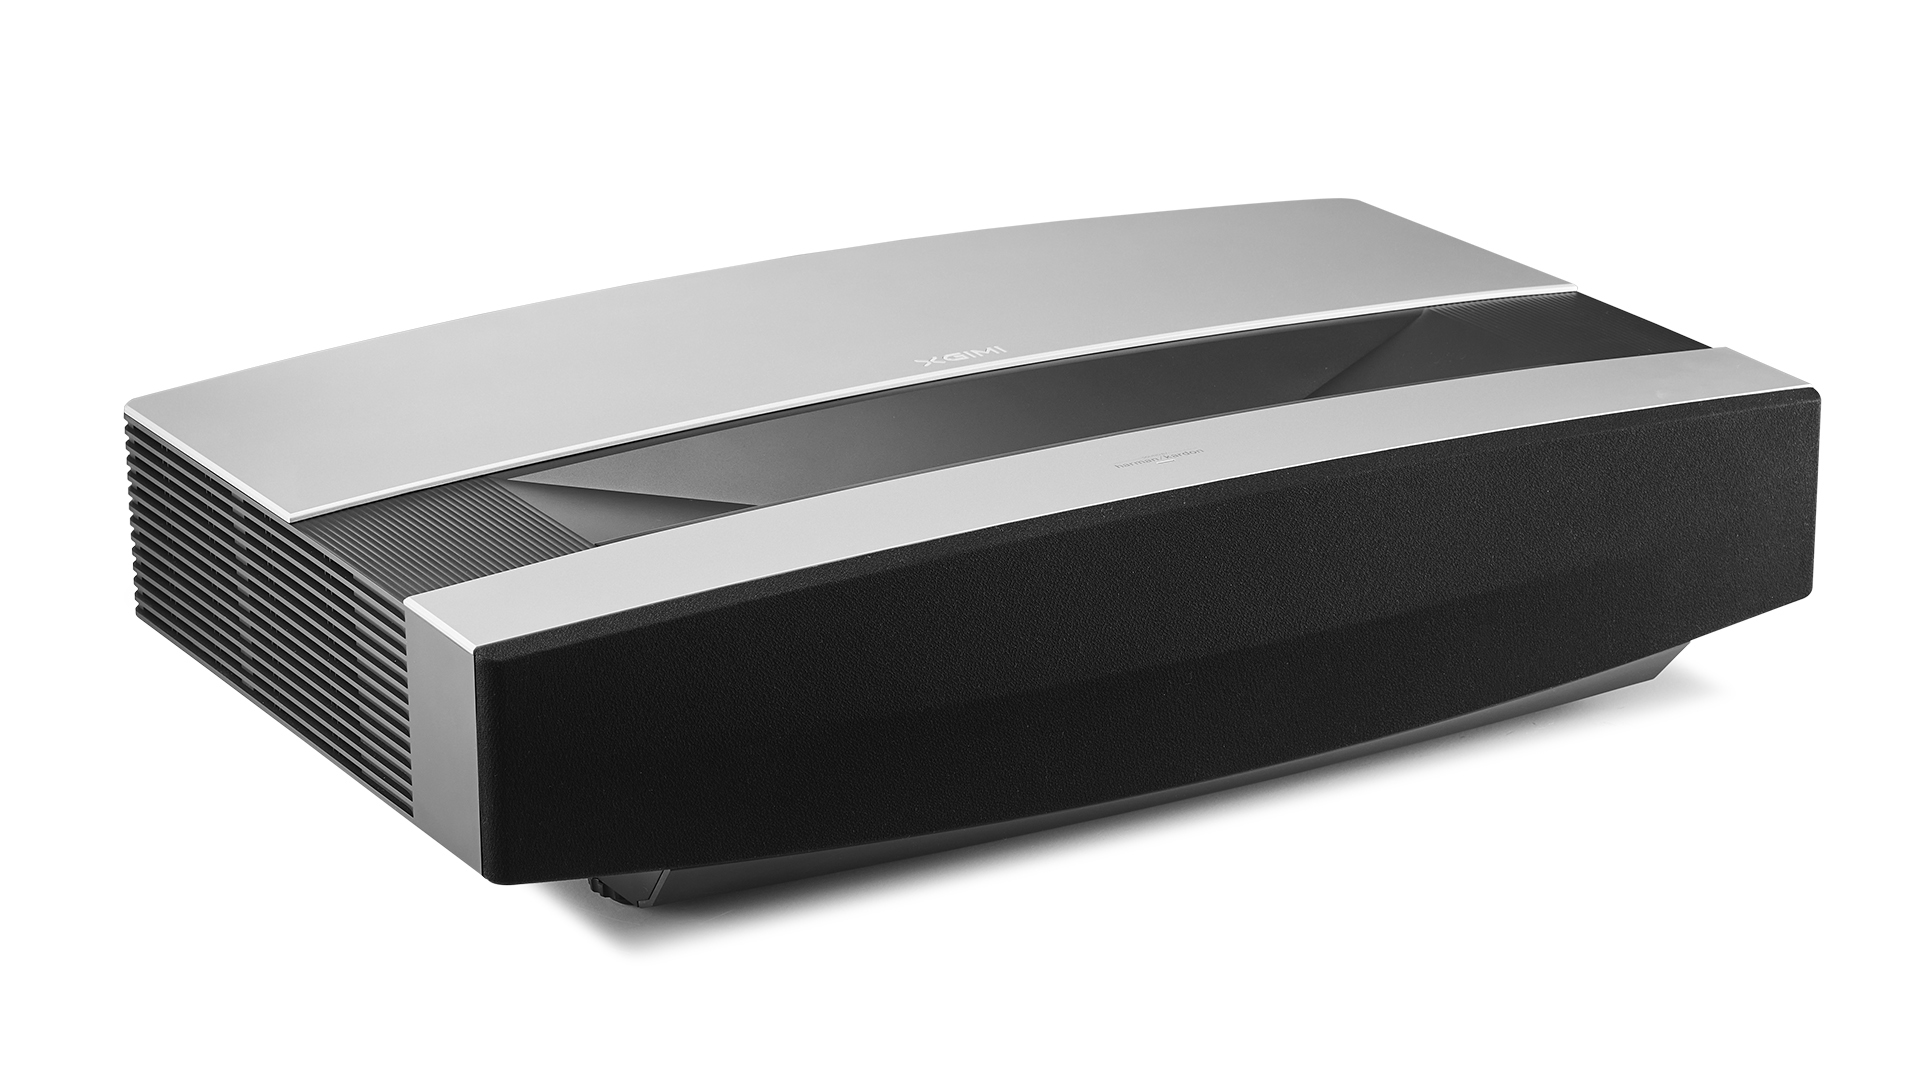 Xgimi Aura 4K ultra short throw laser projector review